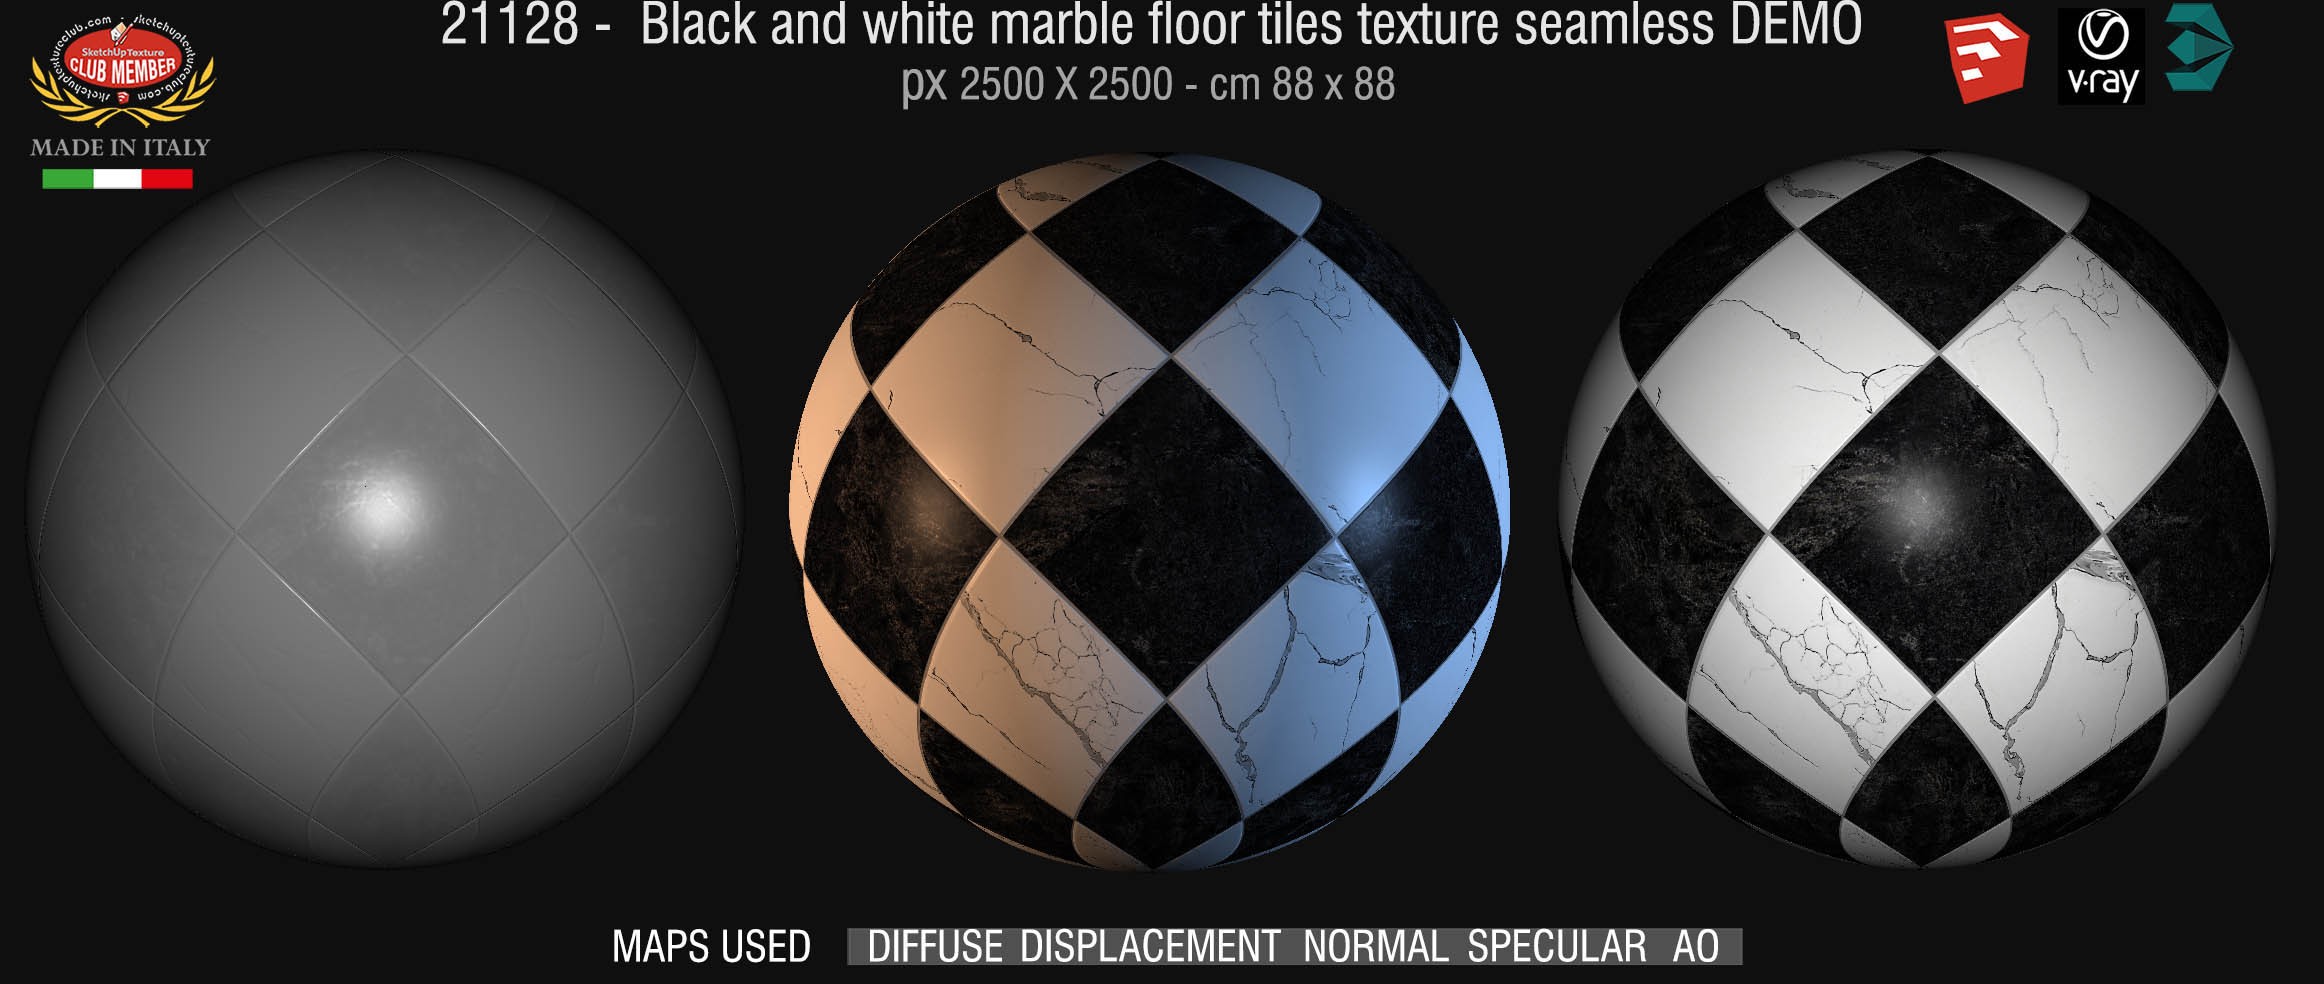 21128 Black and white marble tile texture seamless + maps DEMO